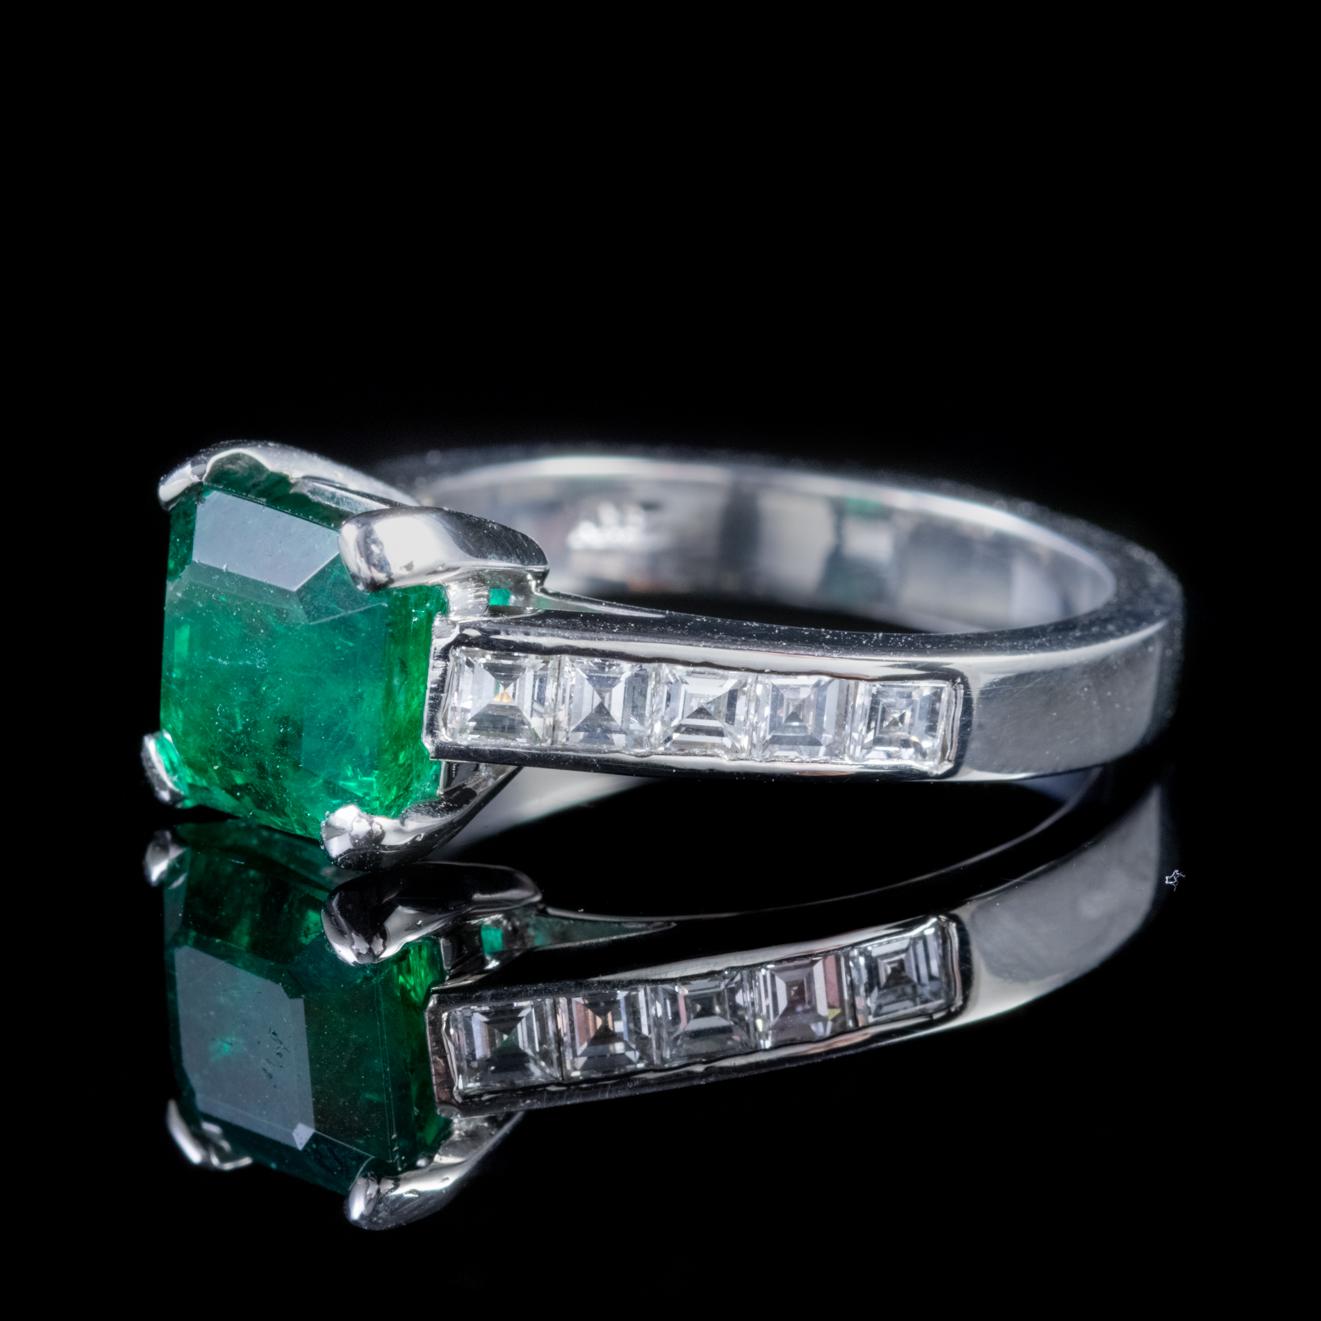 Vintage Emerald Diamond Ring Platinum 2.27ct Emerald 0.80ct Diamond Dated 1956 In Good Condition For Sale In Lancaster, Lancashire